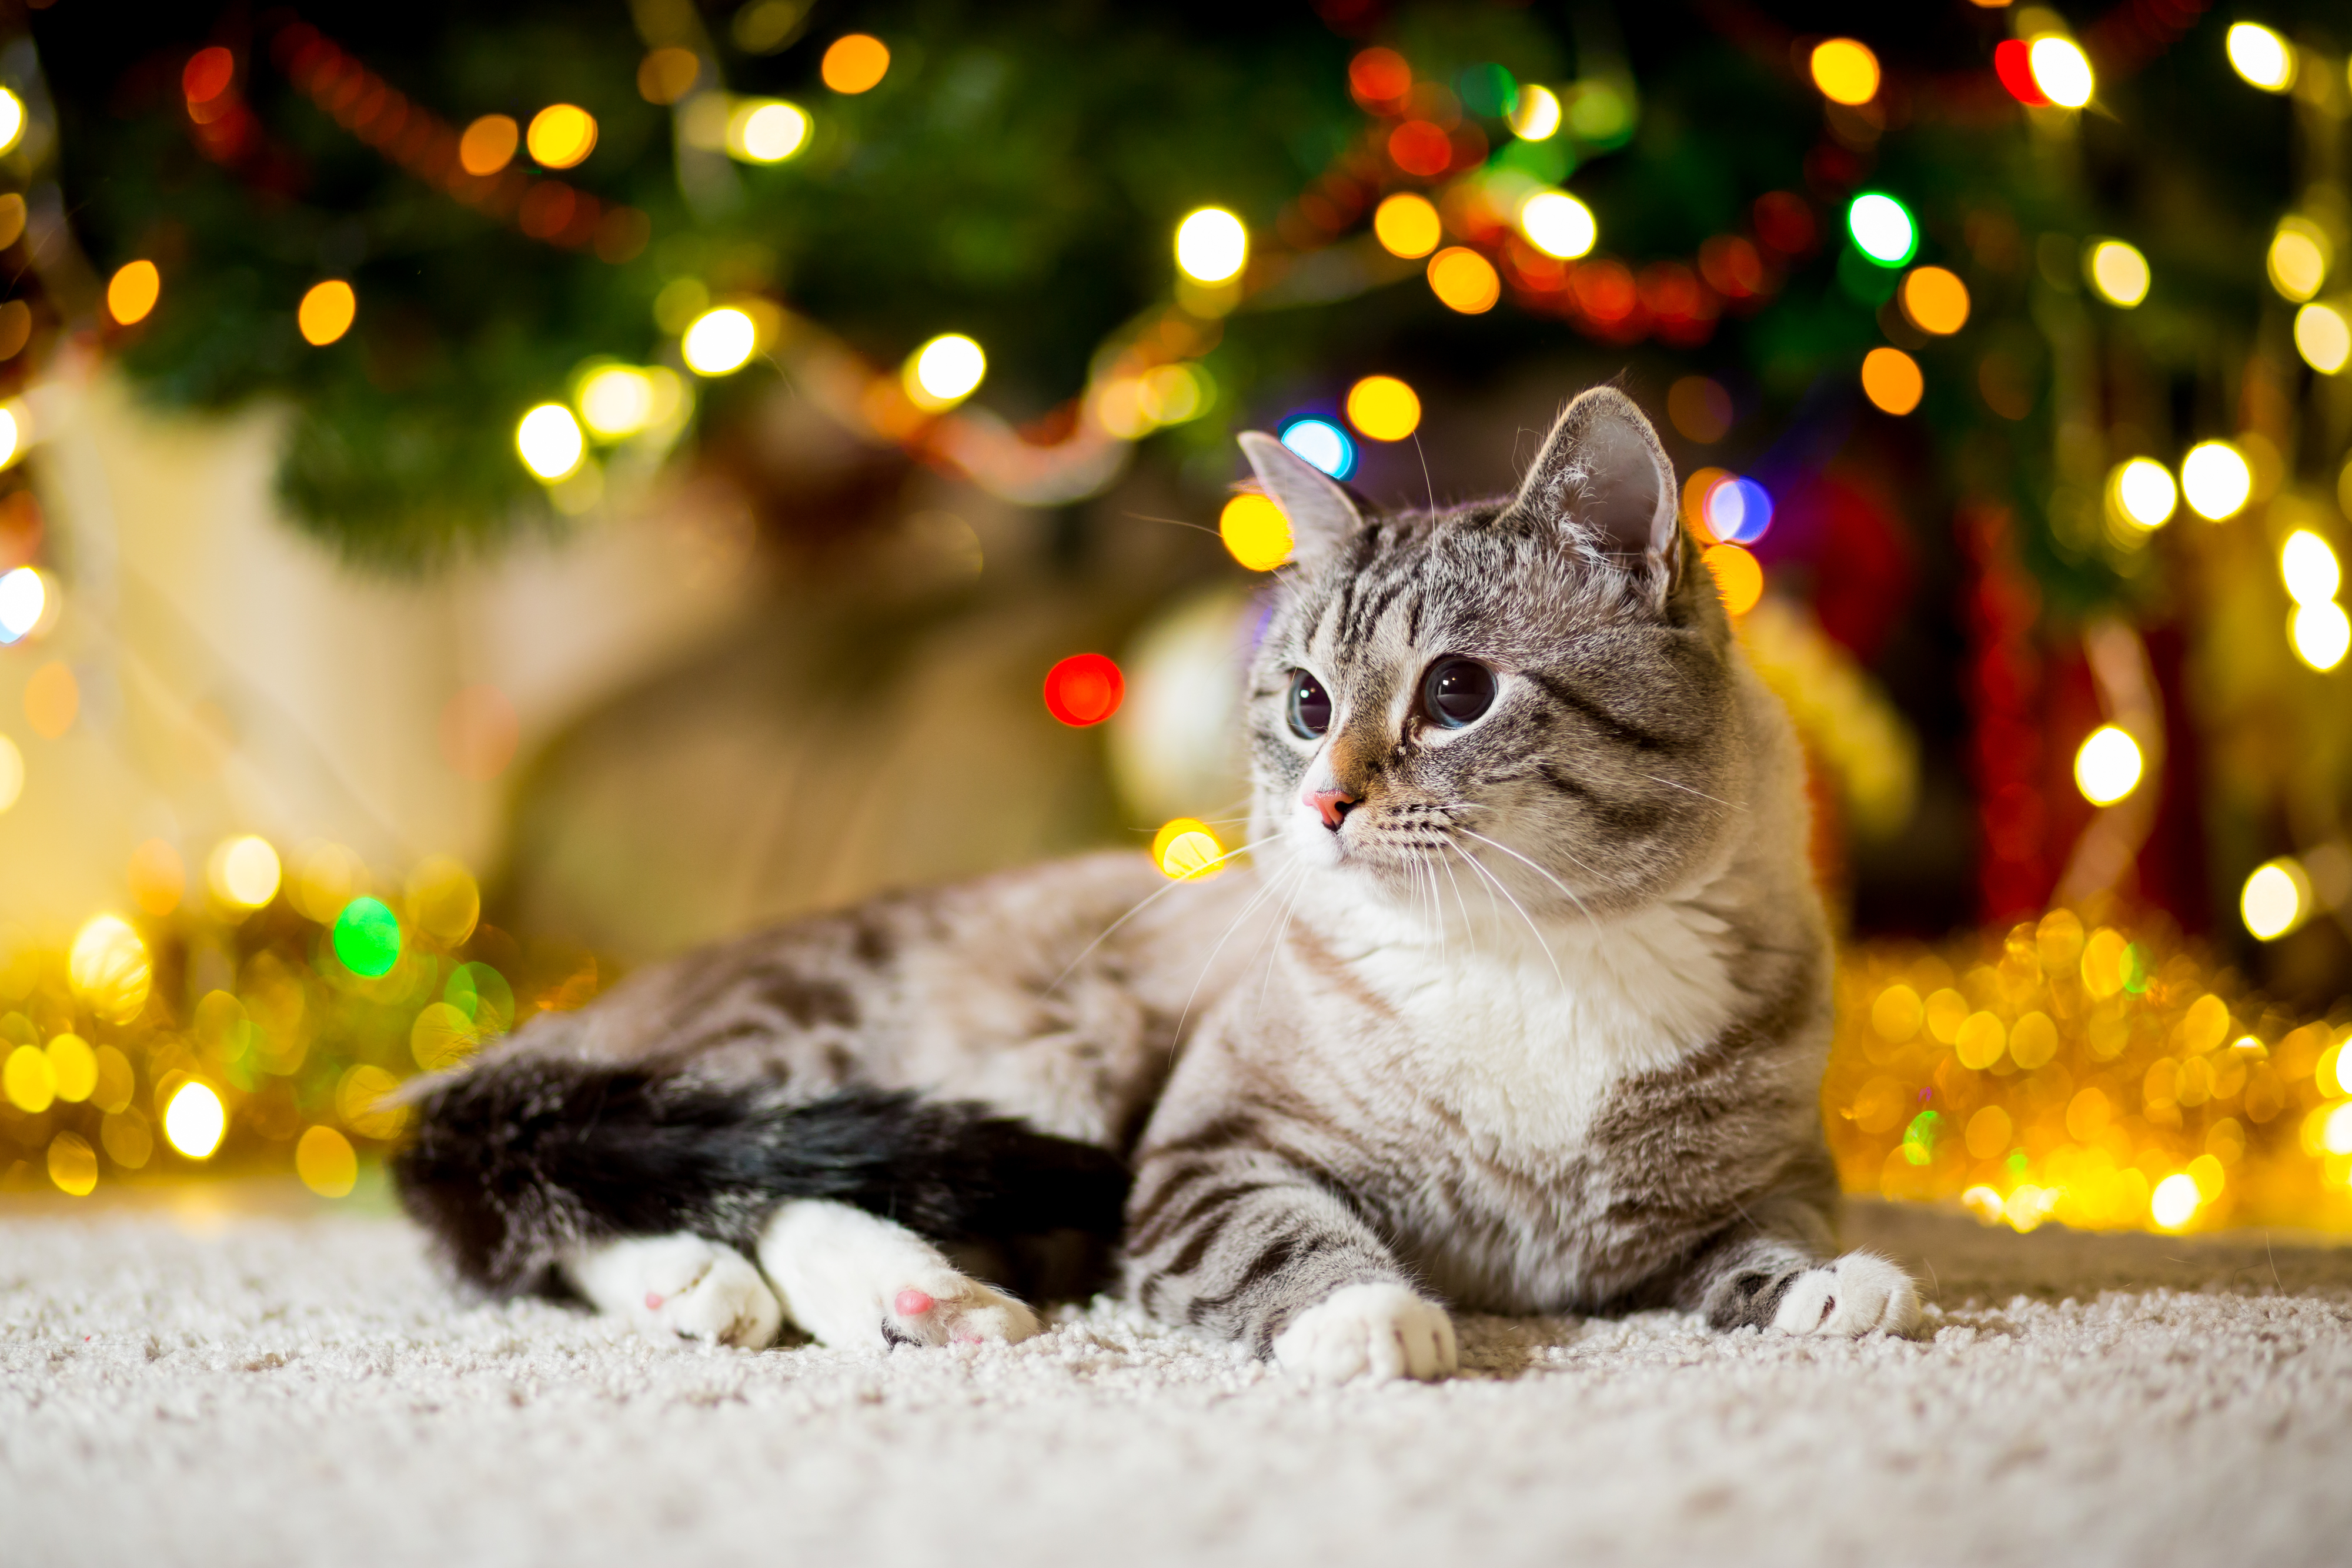 A cute grey tabby cat sits under a Christmas tree